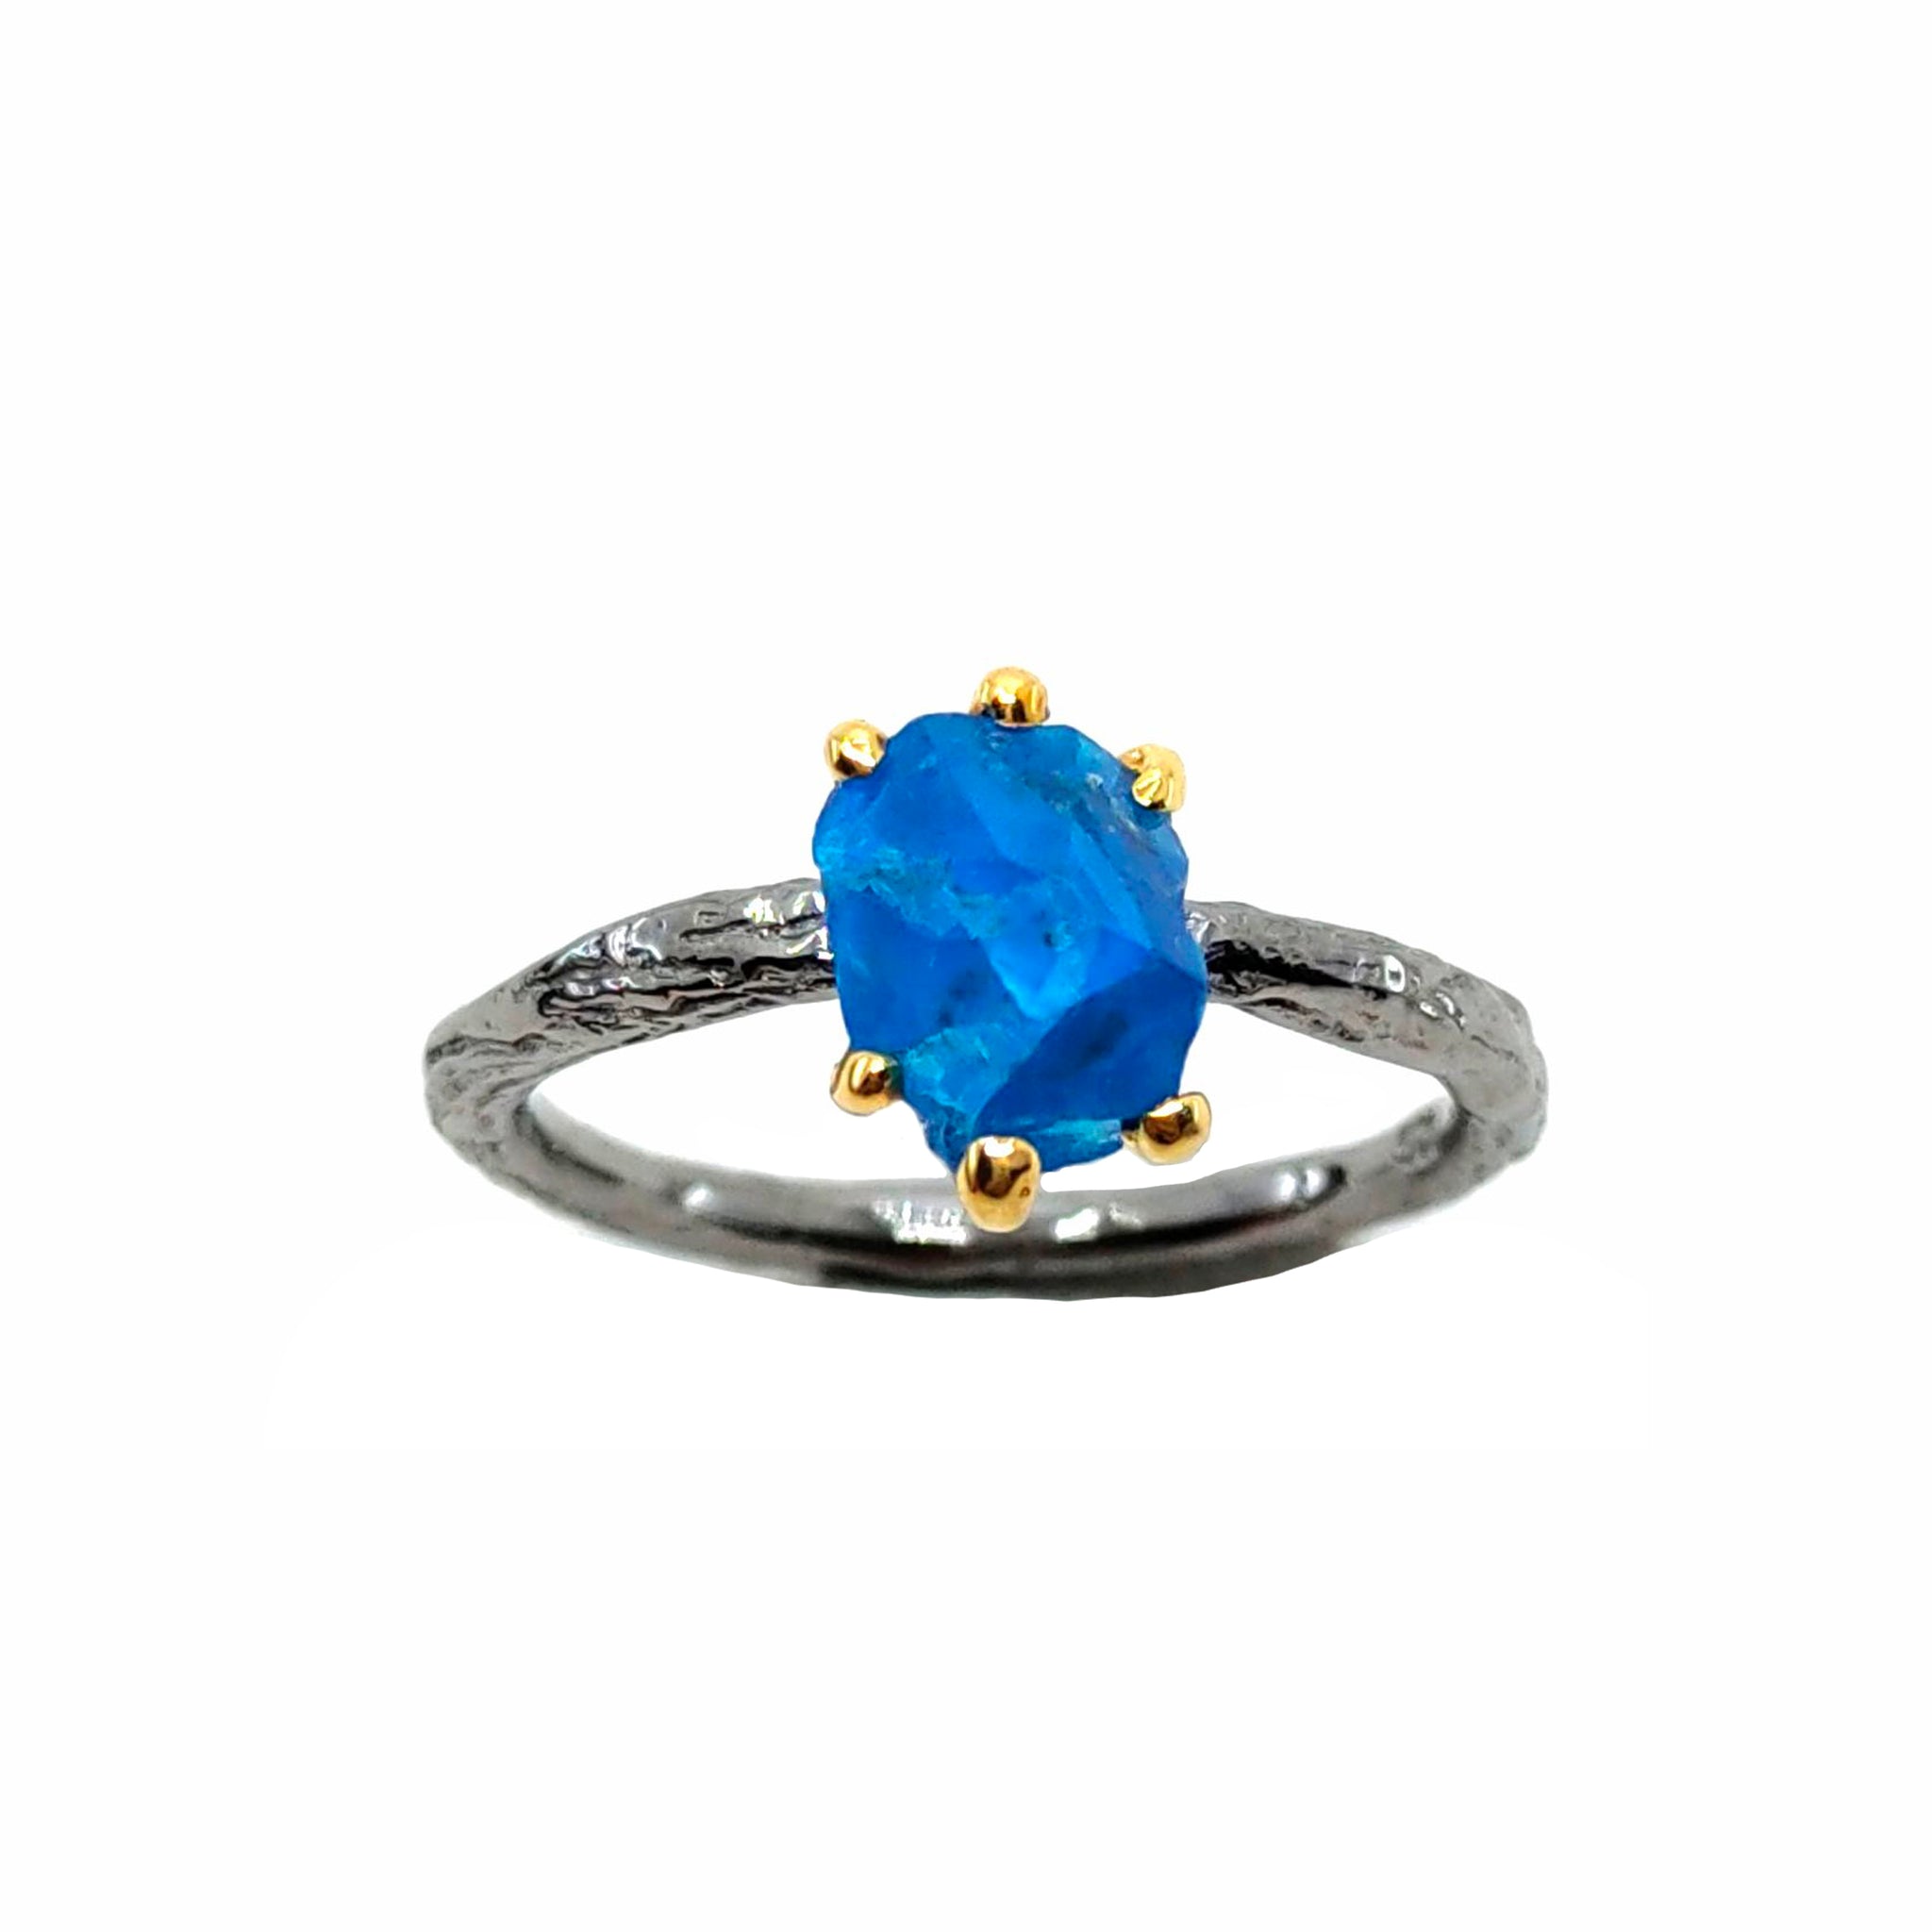 Rough Stone - 925 Sterling Silver Ring, Rough Faceted Apatite, Plated with 3 Micron 22K Yellow Gold and Grey Ruthenium